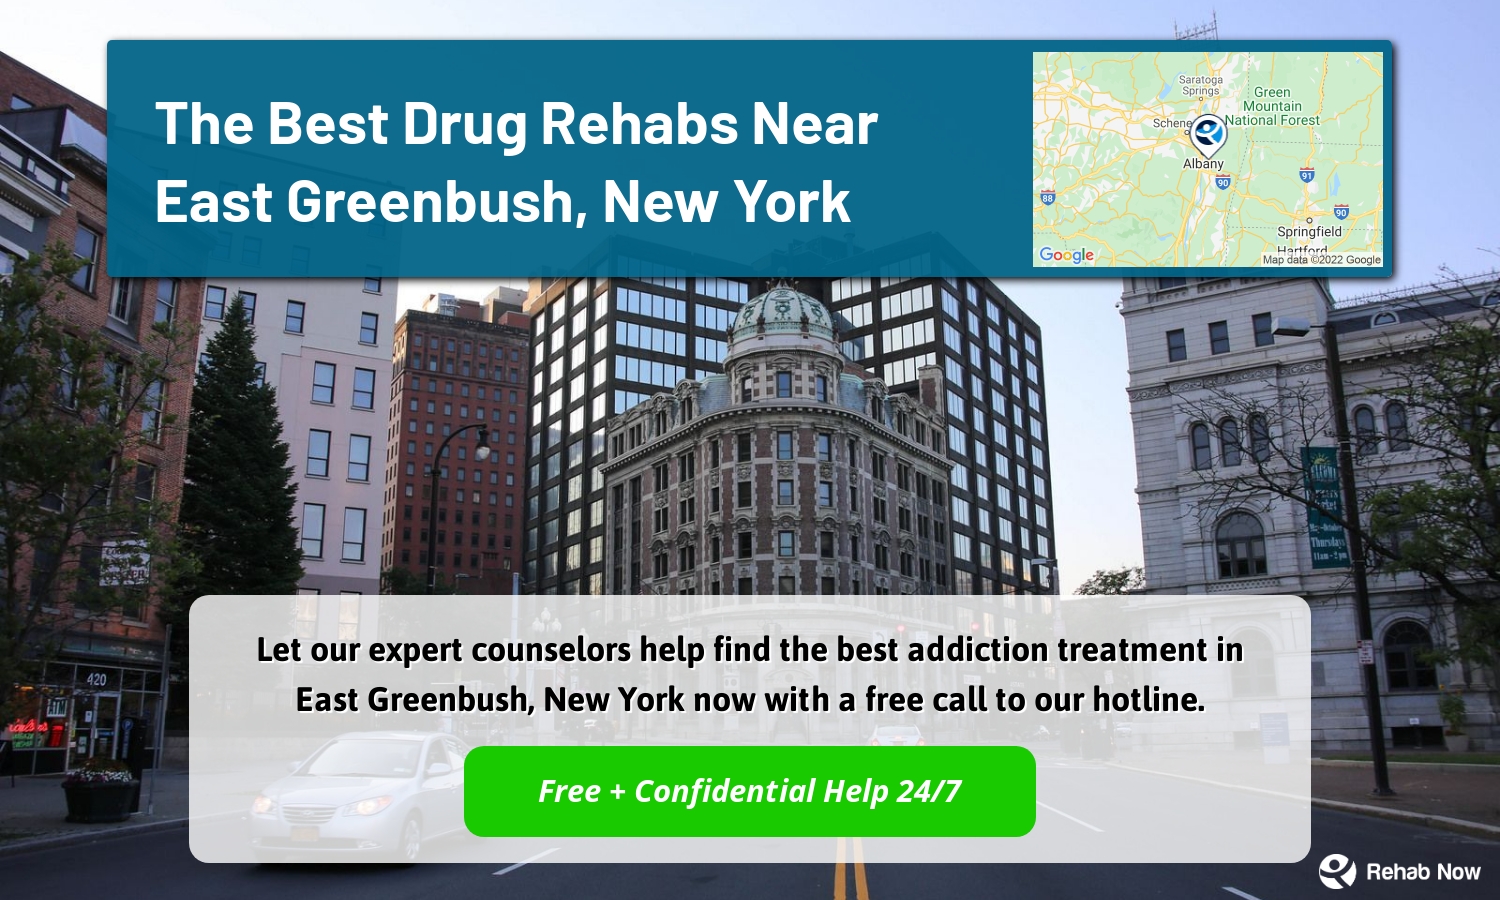 Let our expert counselors help find the best addiction treatment in East Greenbush, New York now with a free call to our hotline.